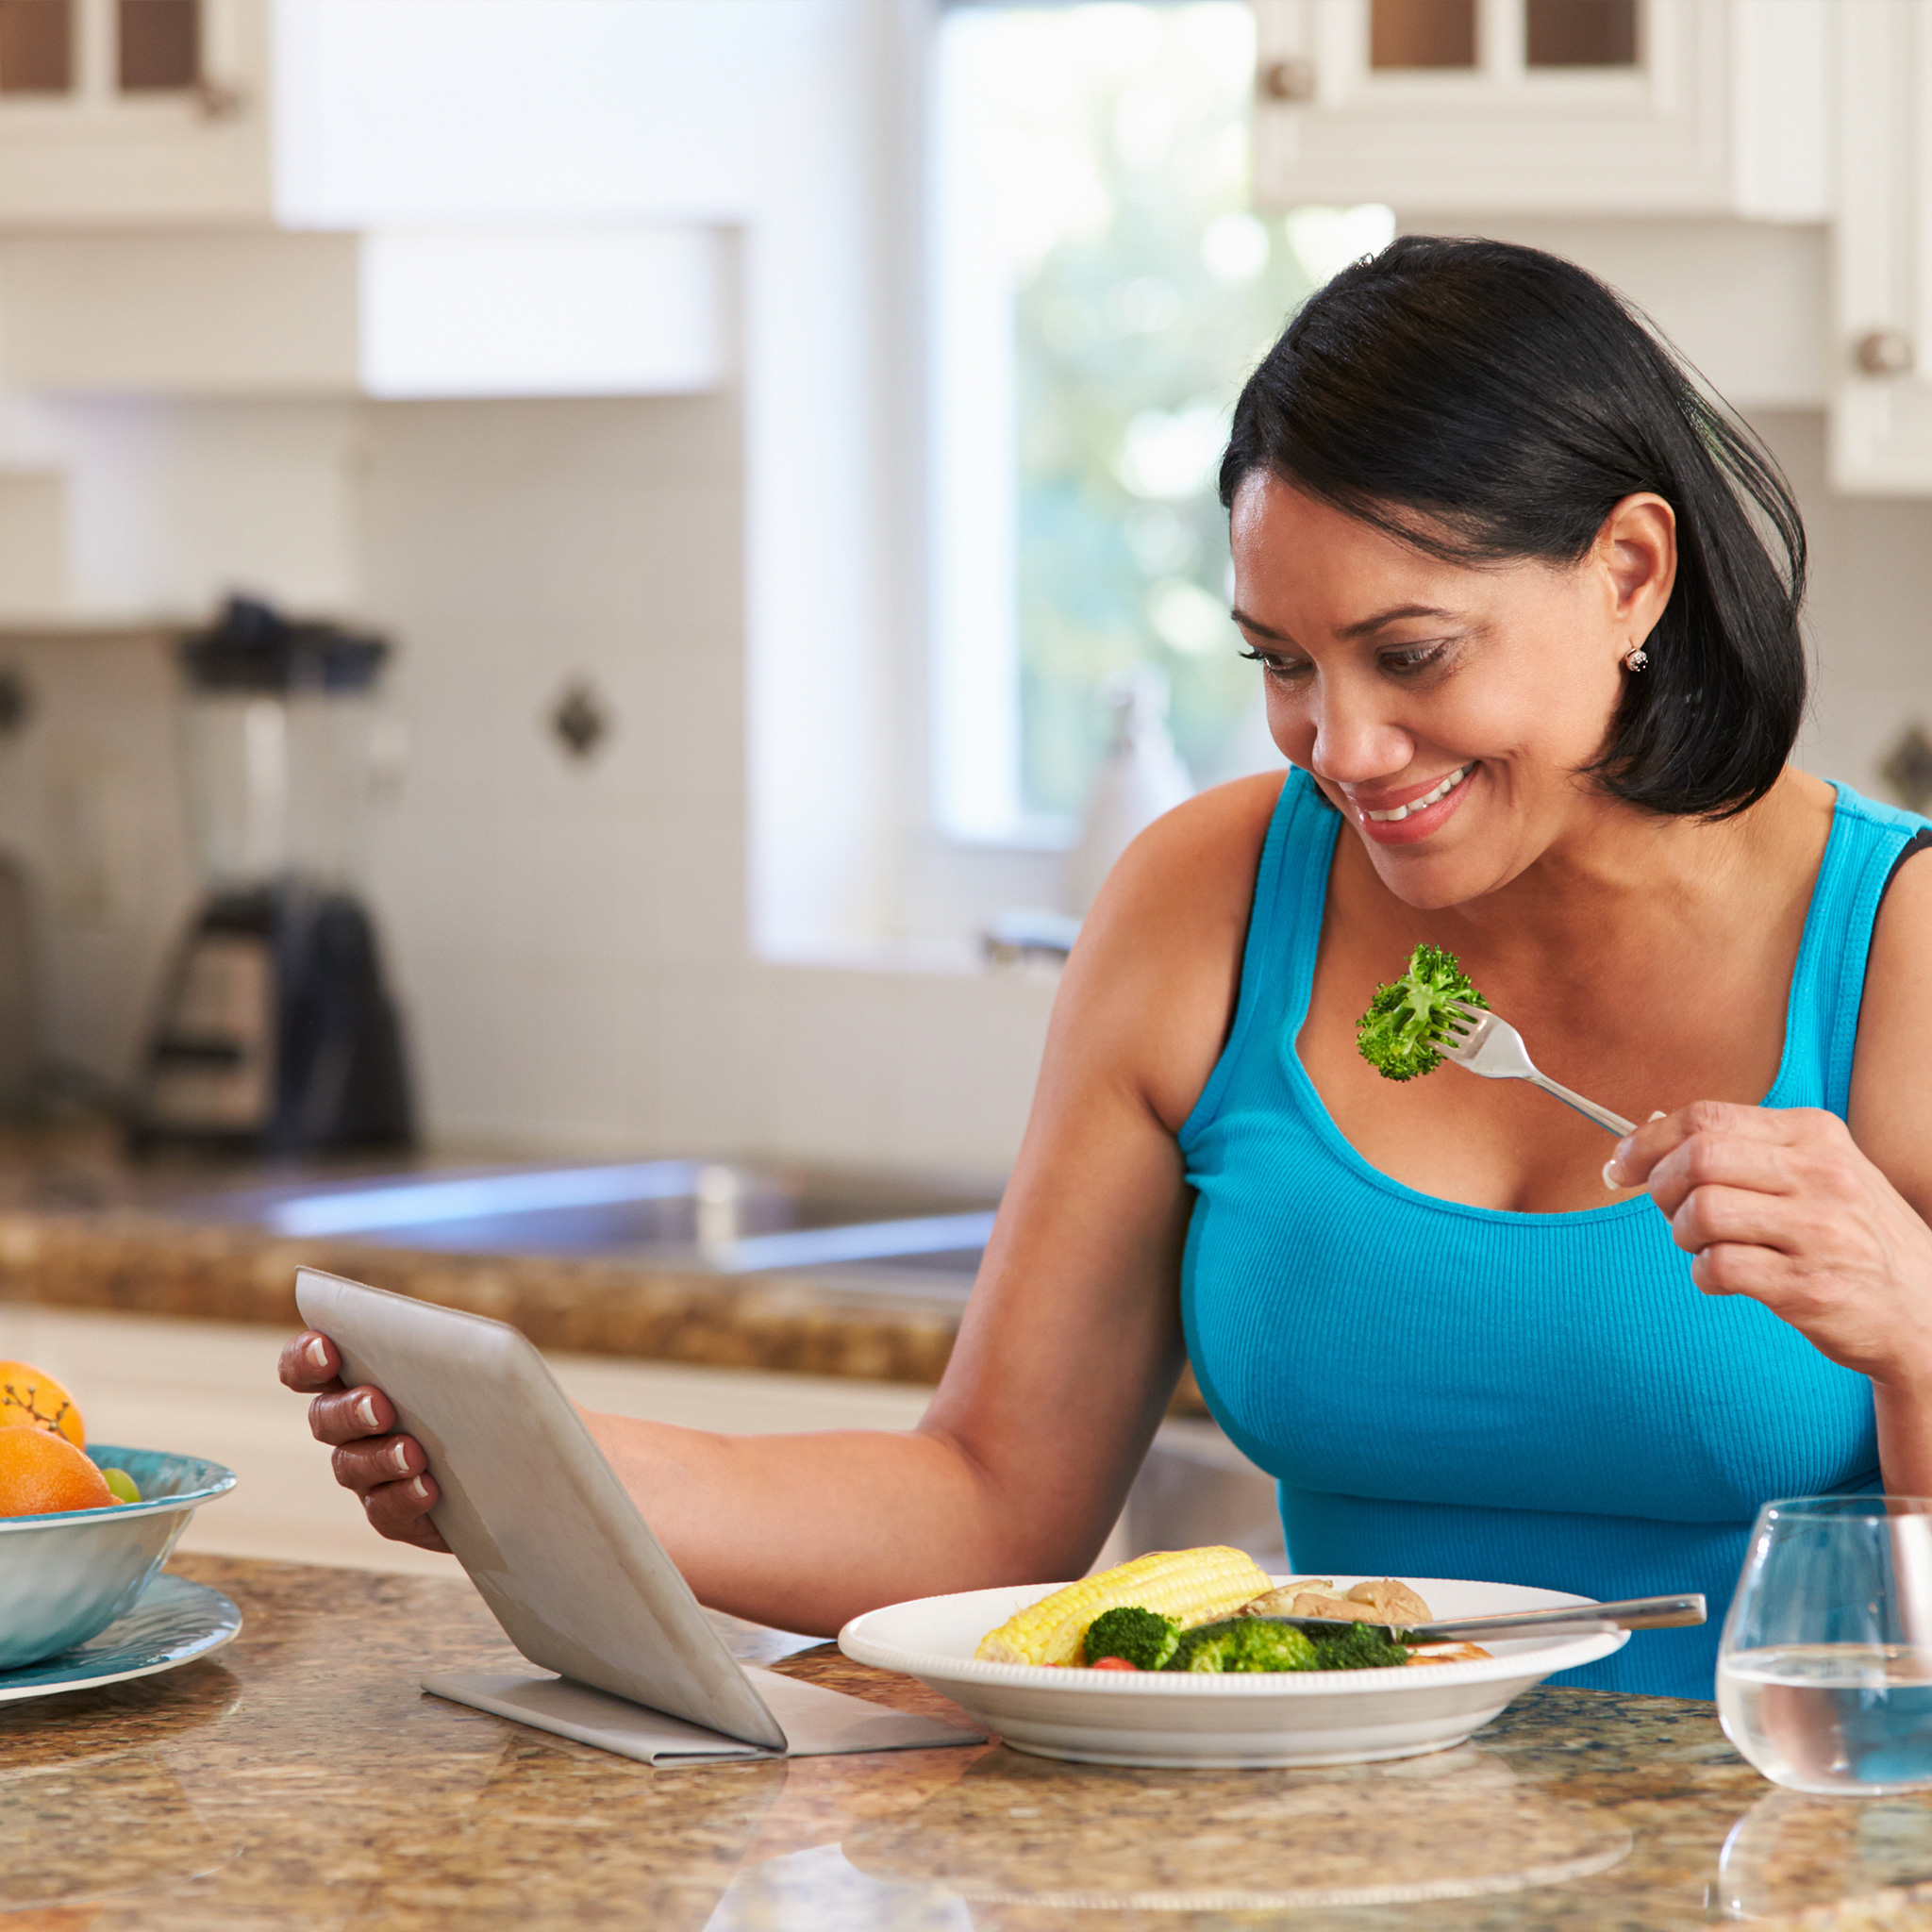 woman eating broccoli smiling at tablet